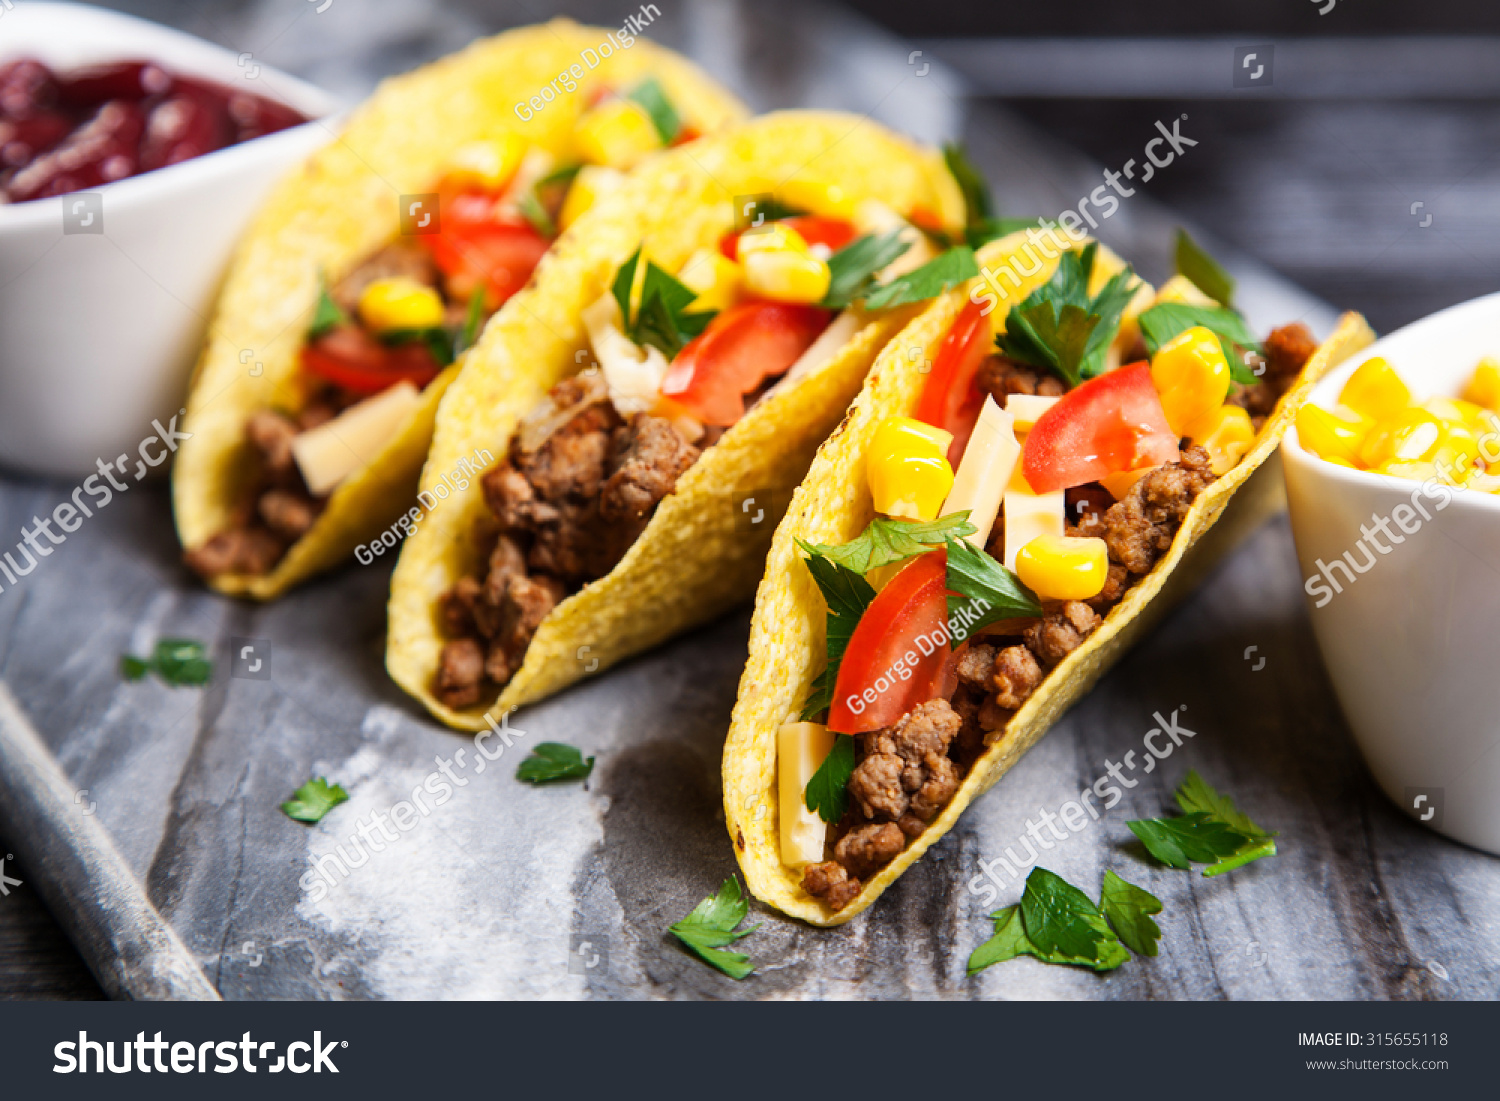 Mexican food - delicious tacos with ground beef #315655118